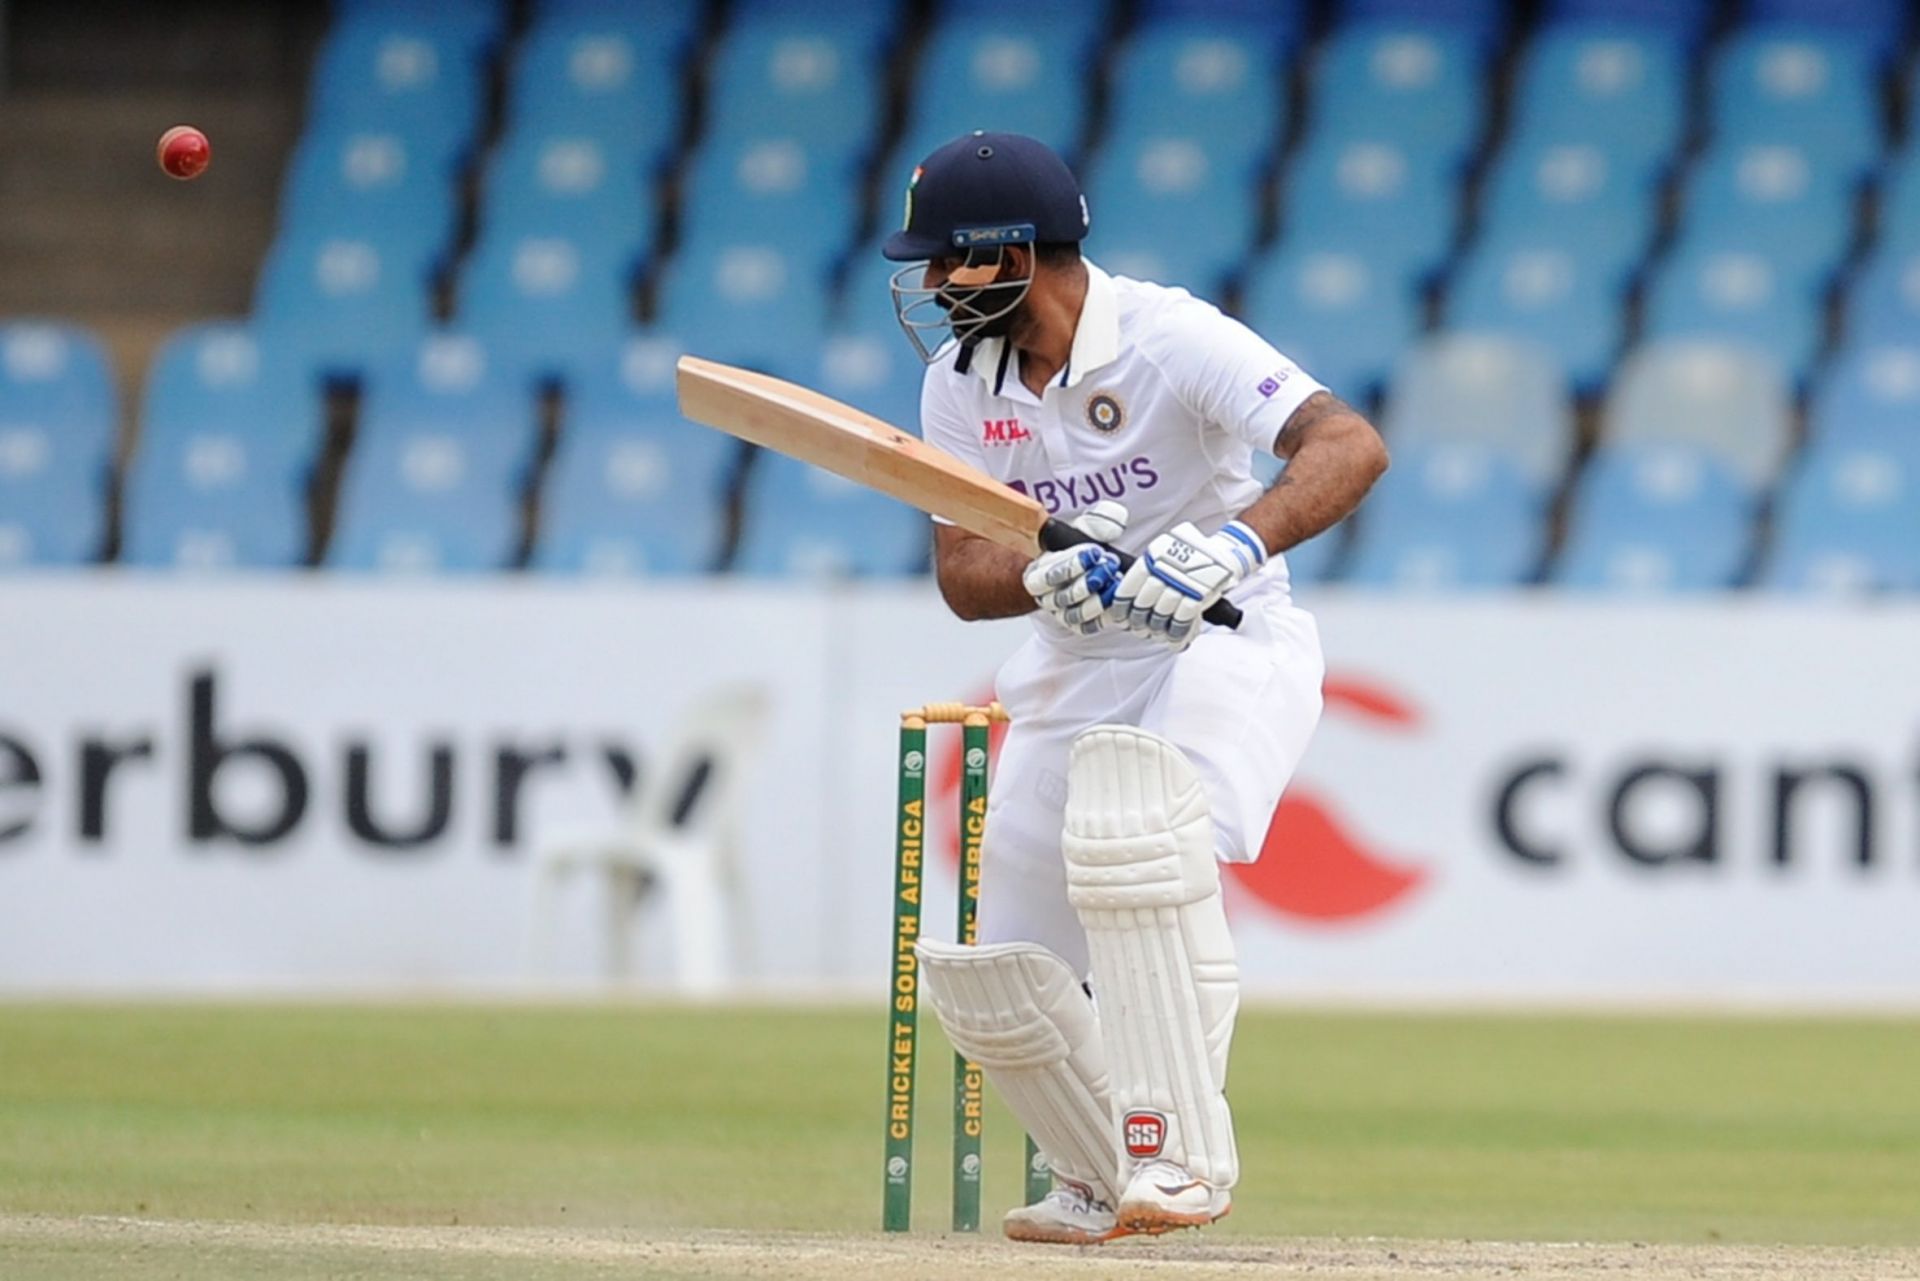 Hanuma Vihari looked comfortable at the middle in both innings of the Johannesburg Test